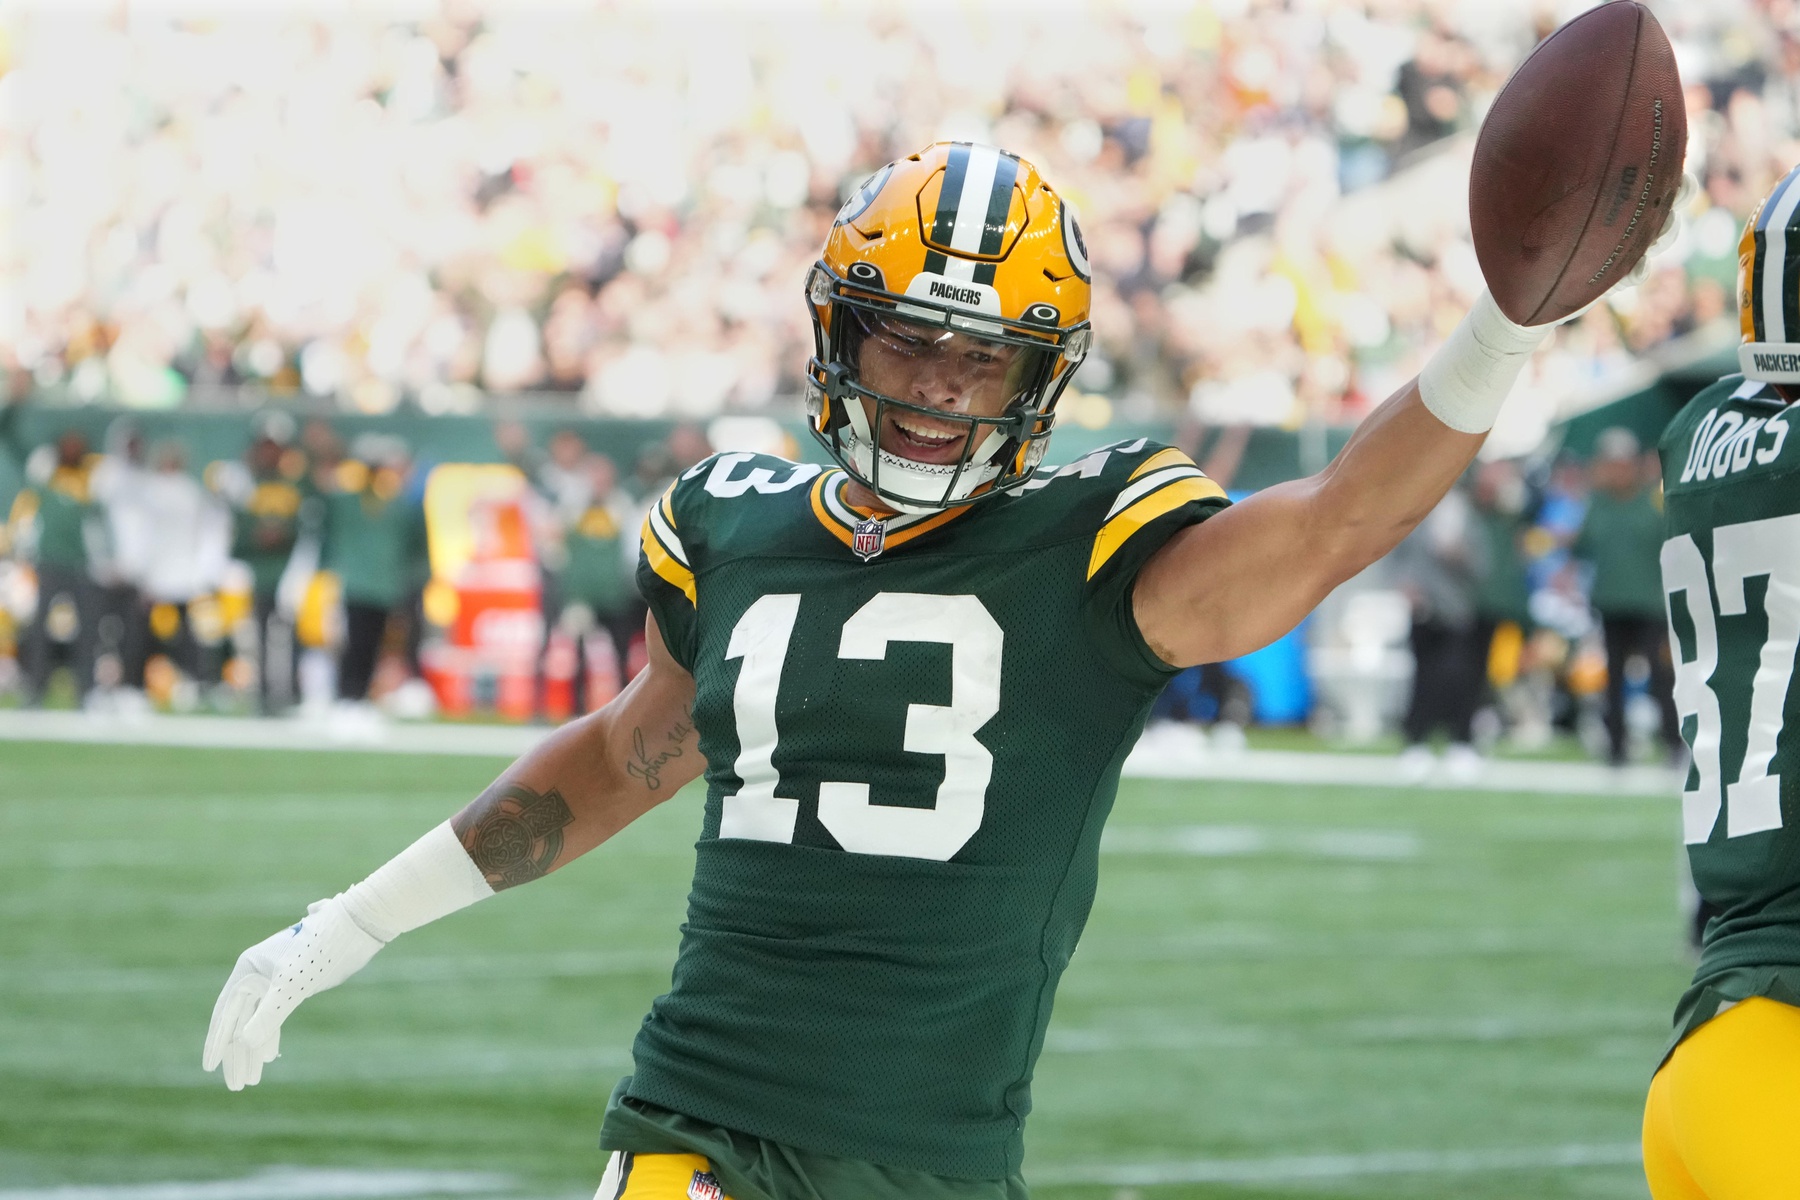 Green Bay Packers: NFL Analyst Does Not Have a Good 2nd Contract